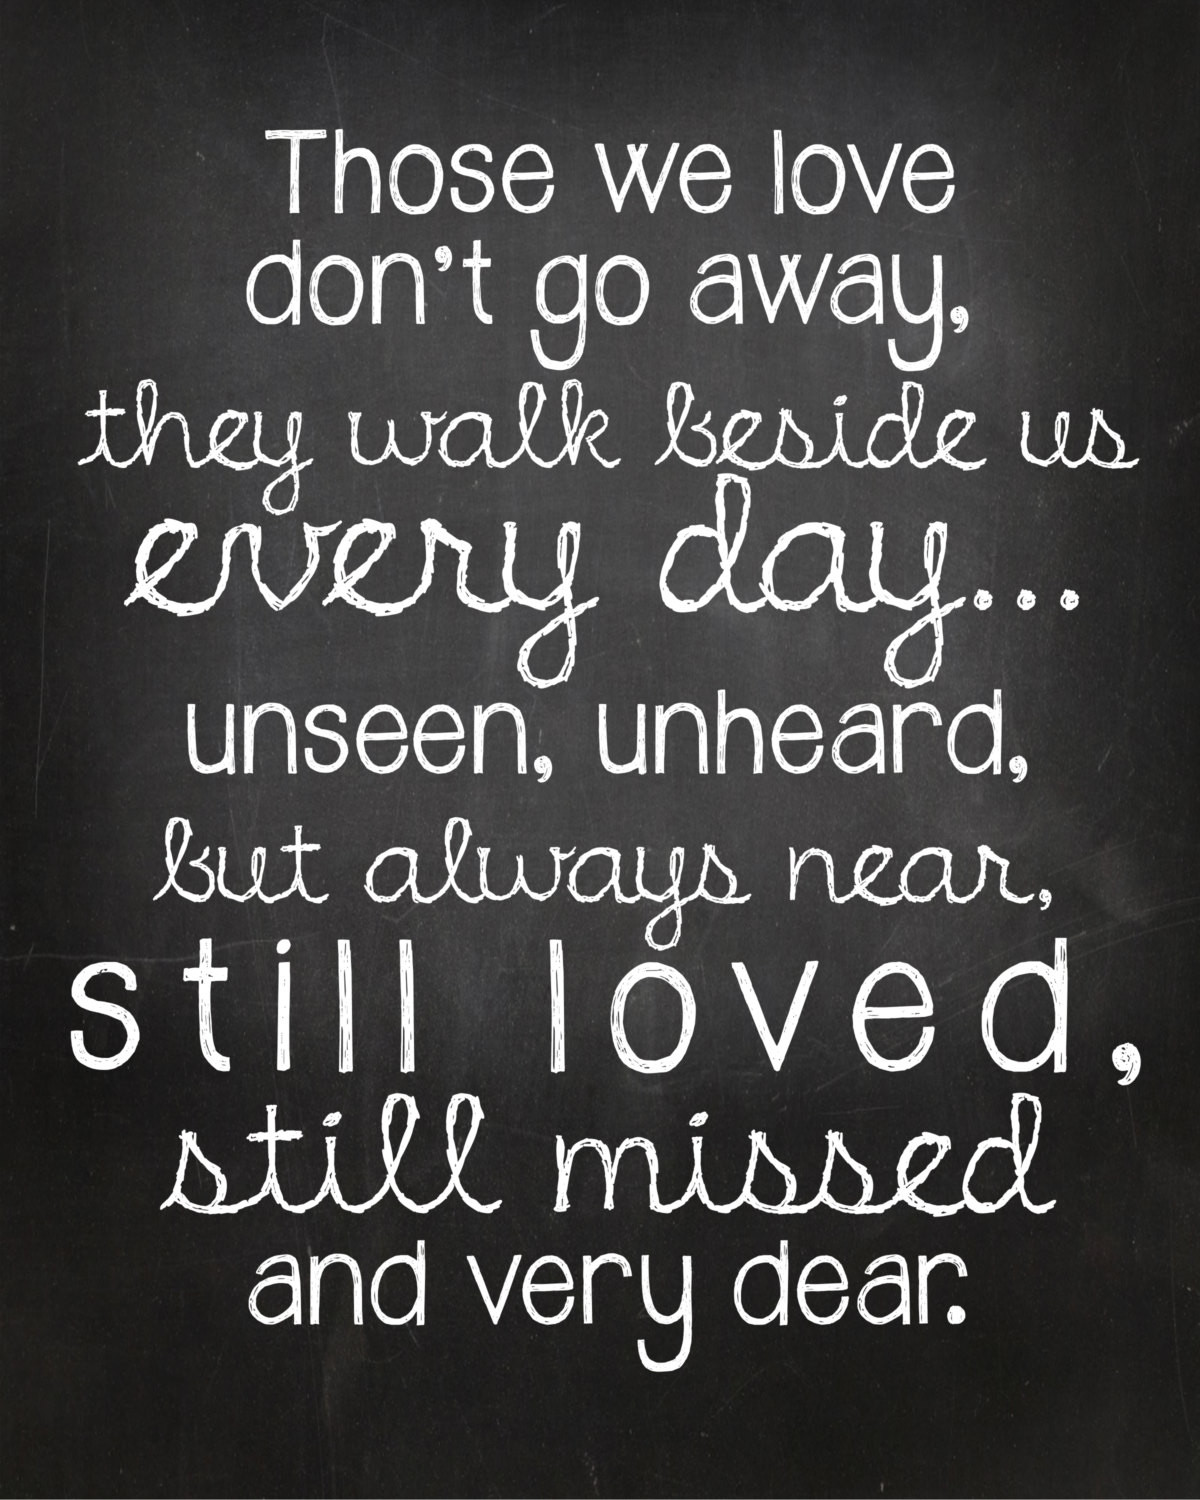 Grandmother Passing Away Quotes
 Quotes About Grandmother Who Passed Away QuotesGram